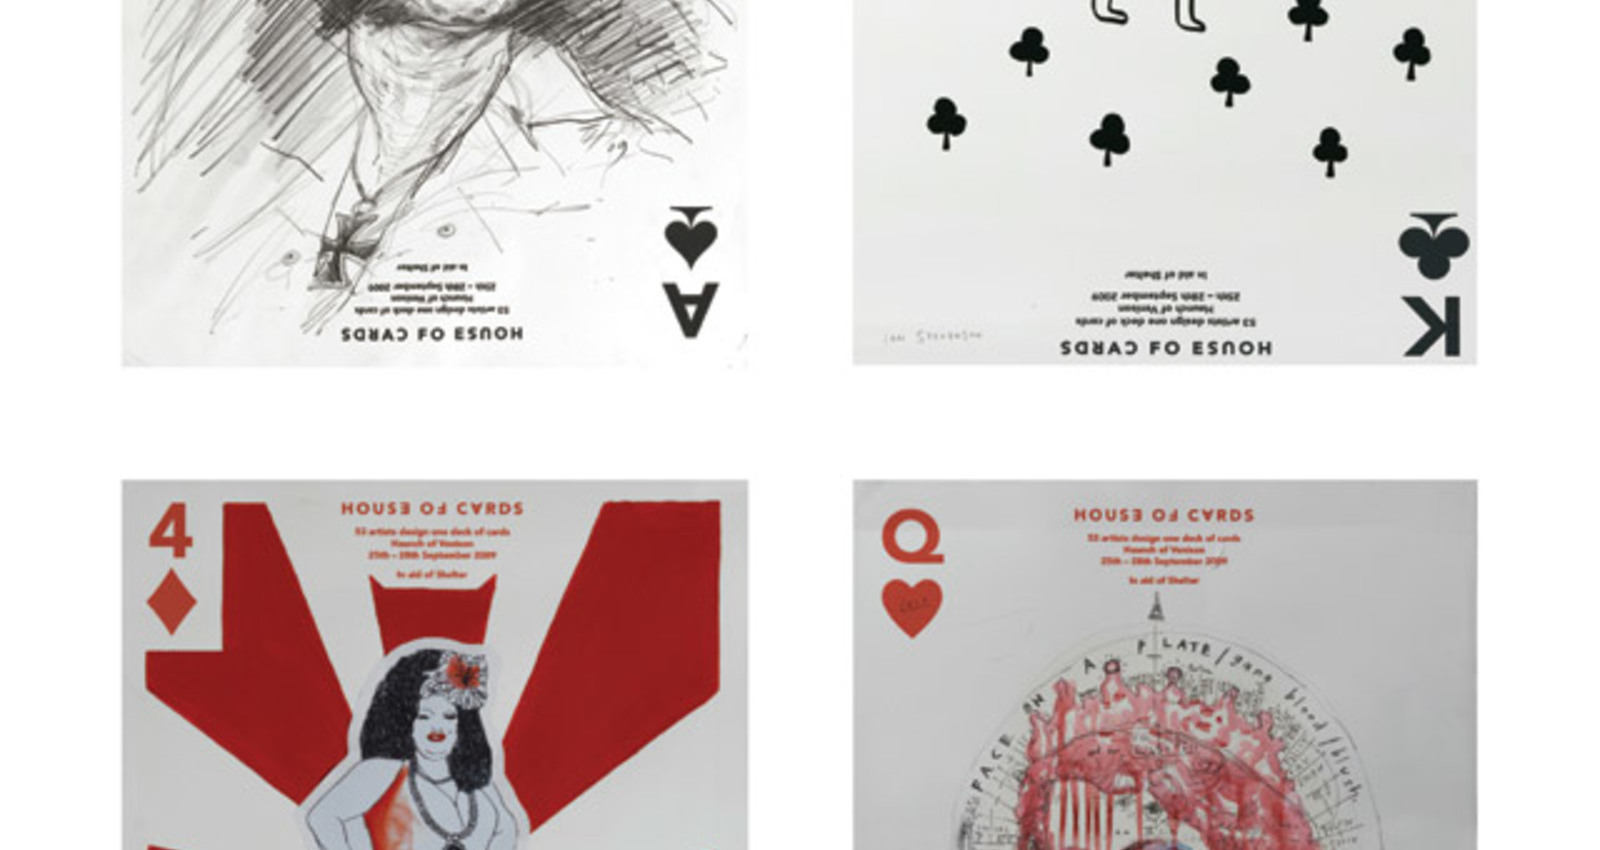 House of Cards - Live Posters